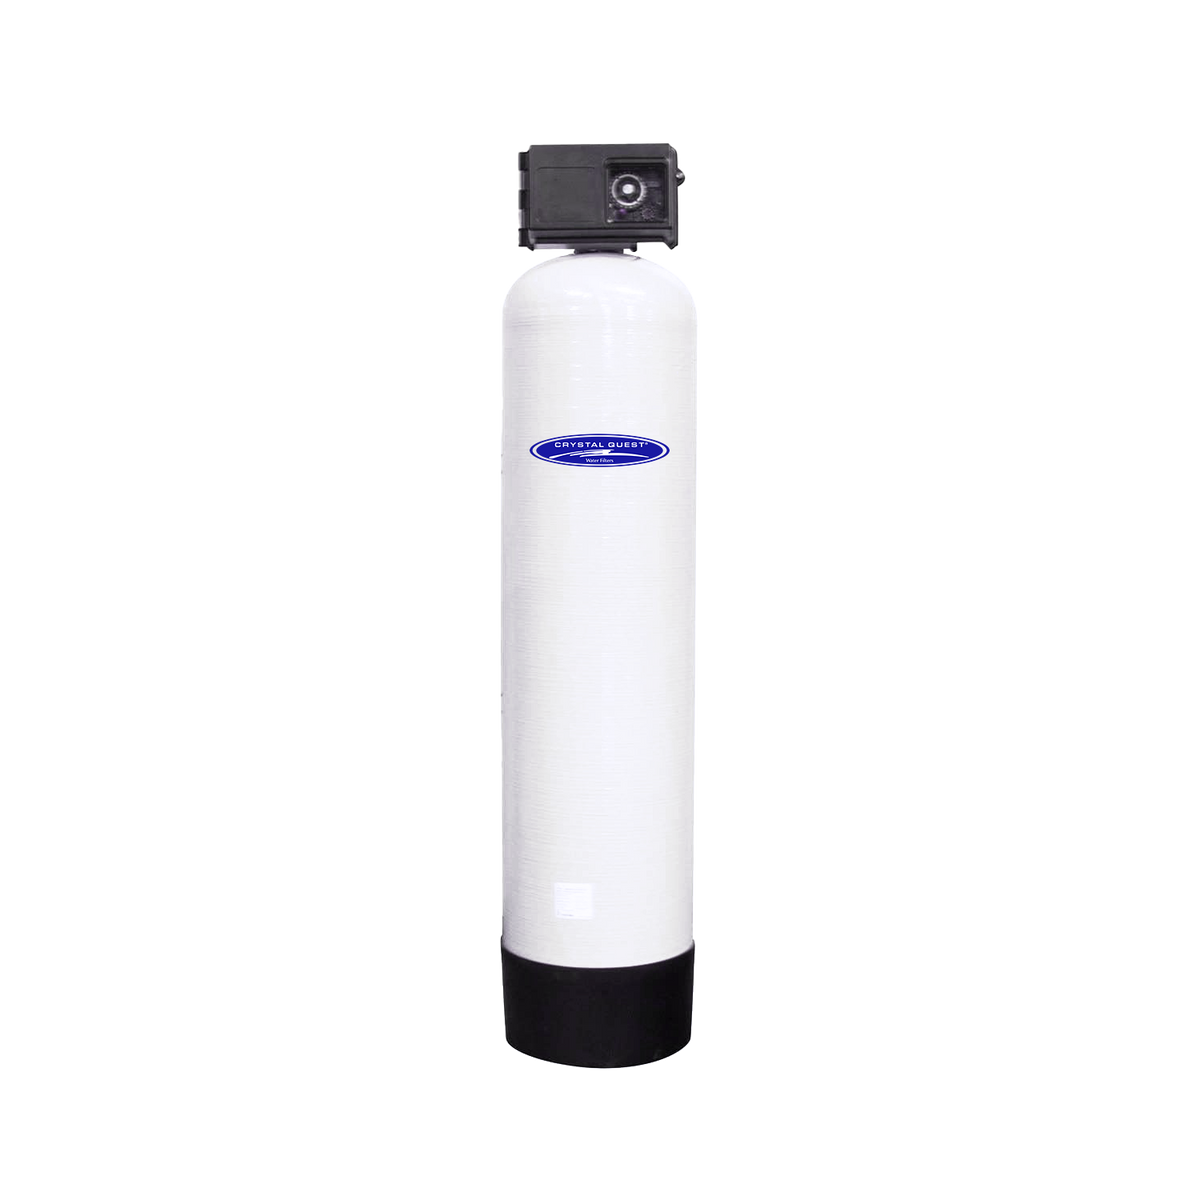 20 GPM / Automatic Acid Neutralizing Water Filtration System - Commercial - Crystal Quest